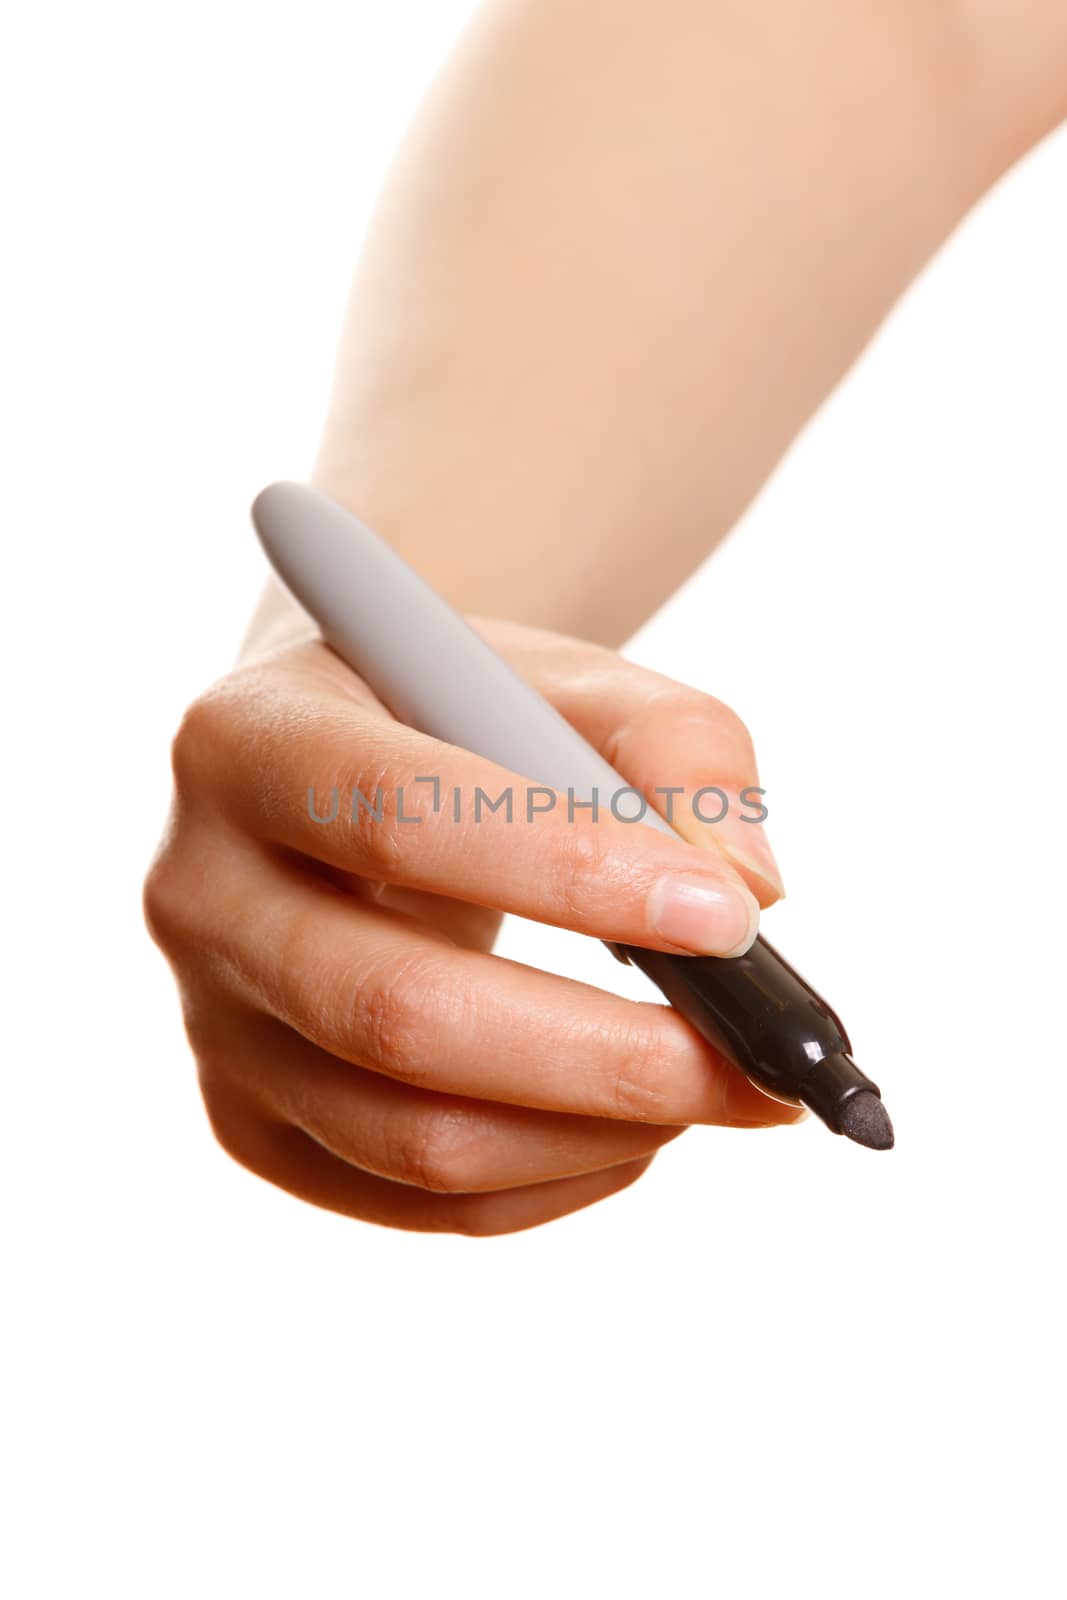 Woman's hand with a black marker writing on a white background